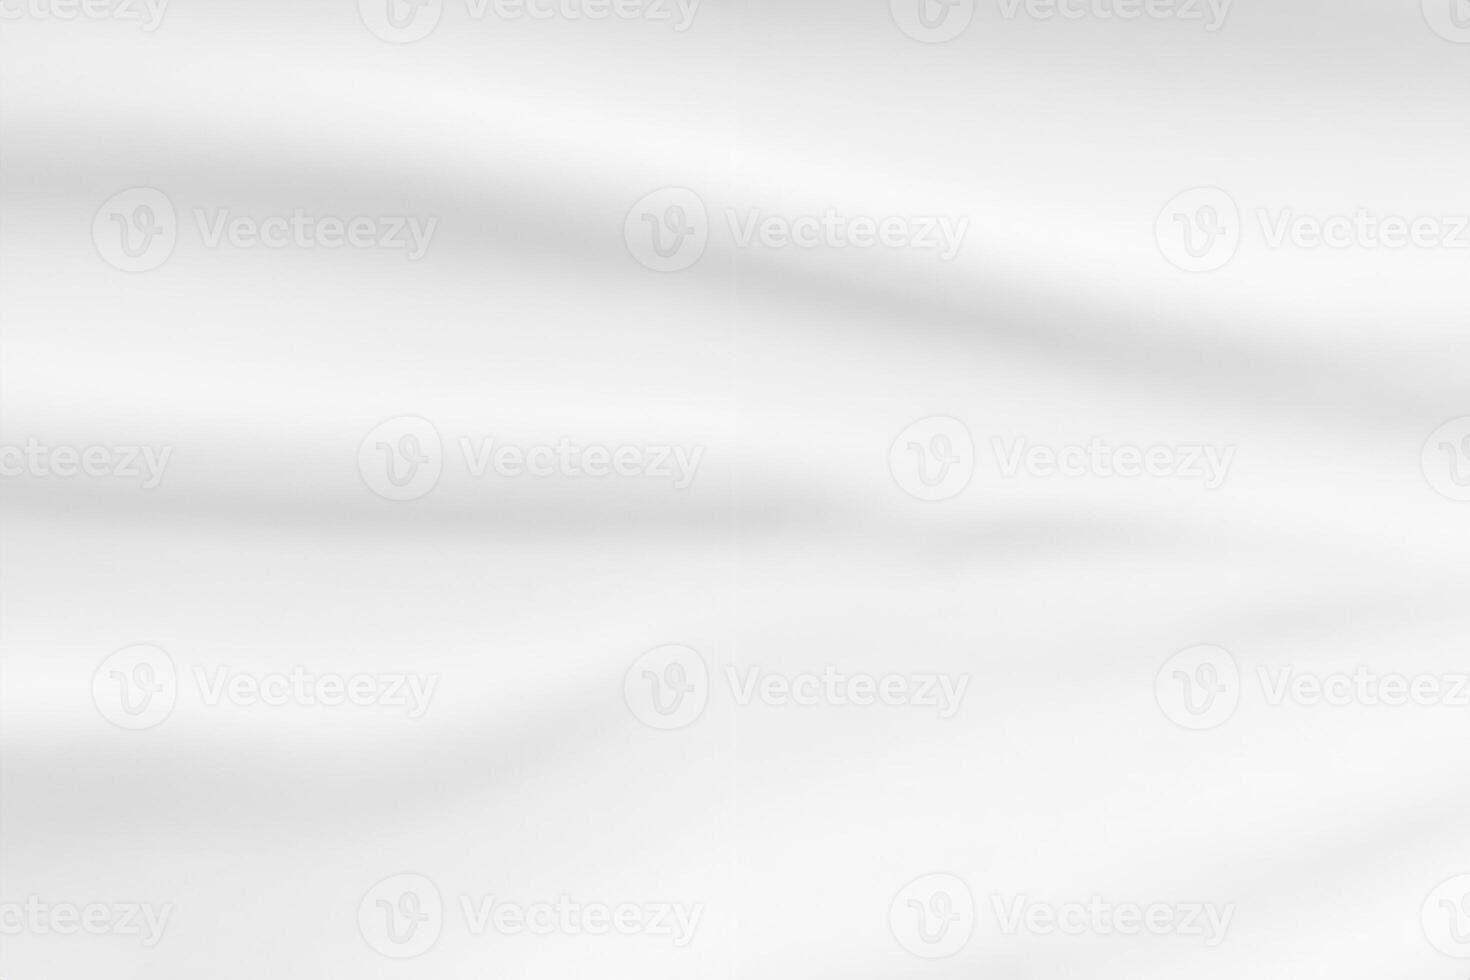 Abstract white fabric cloth texture blur background photo